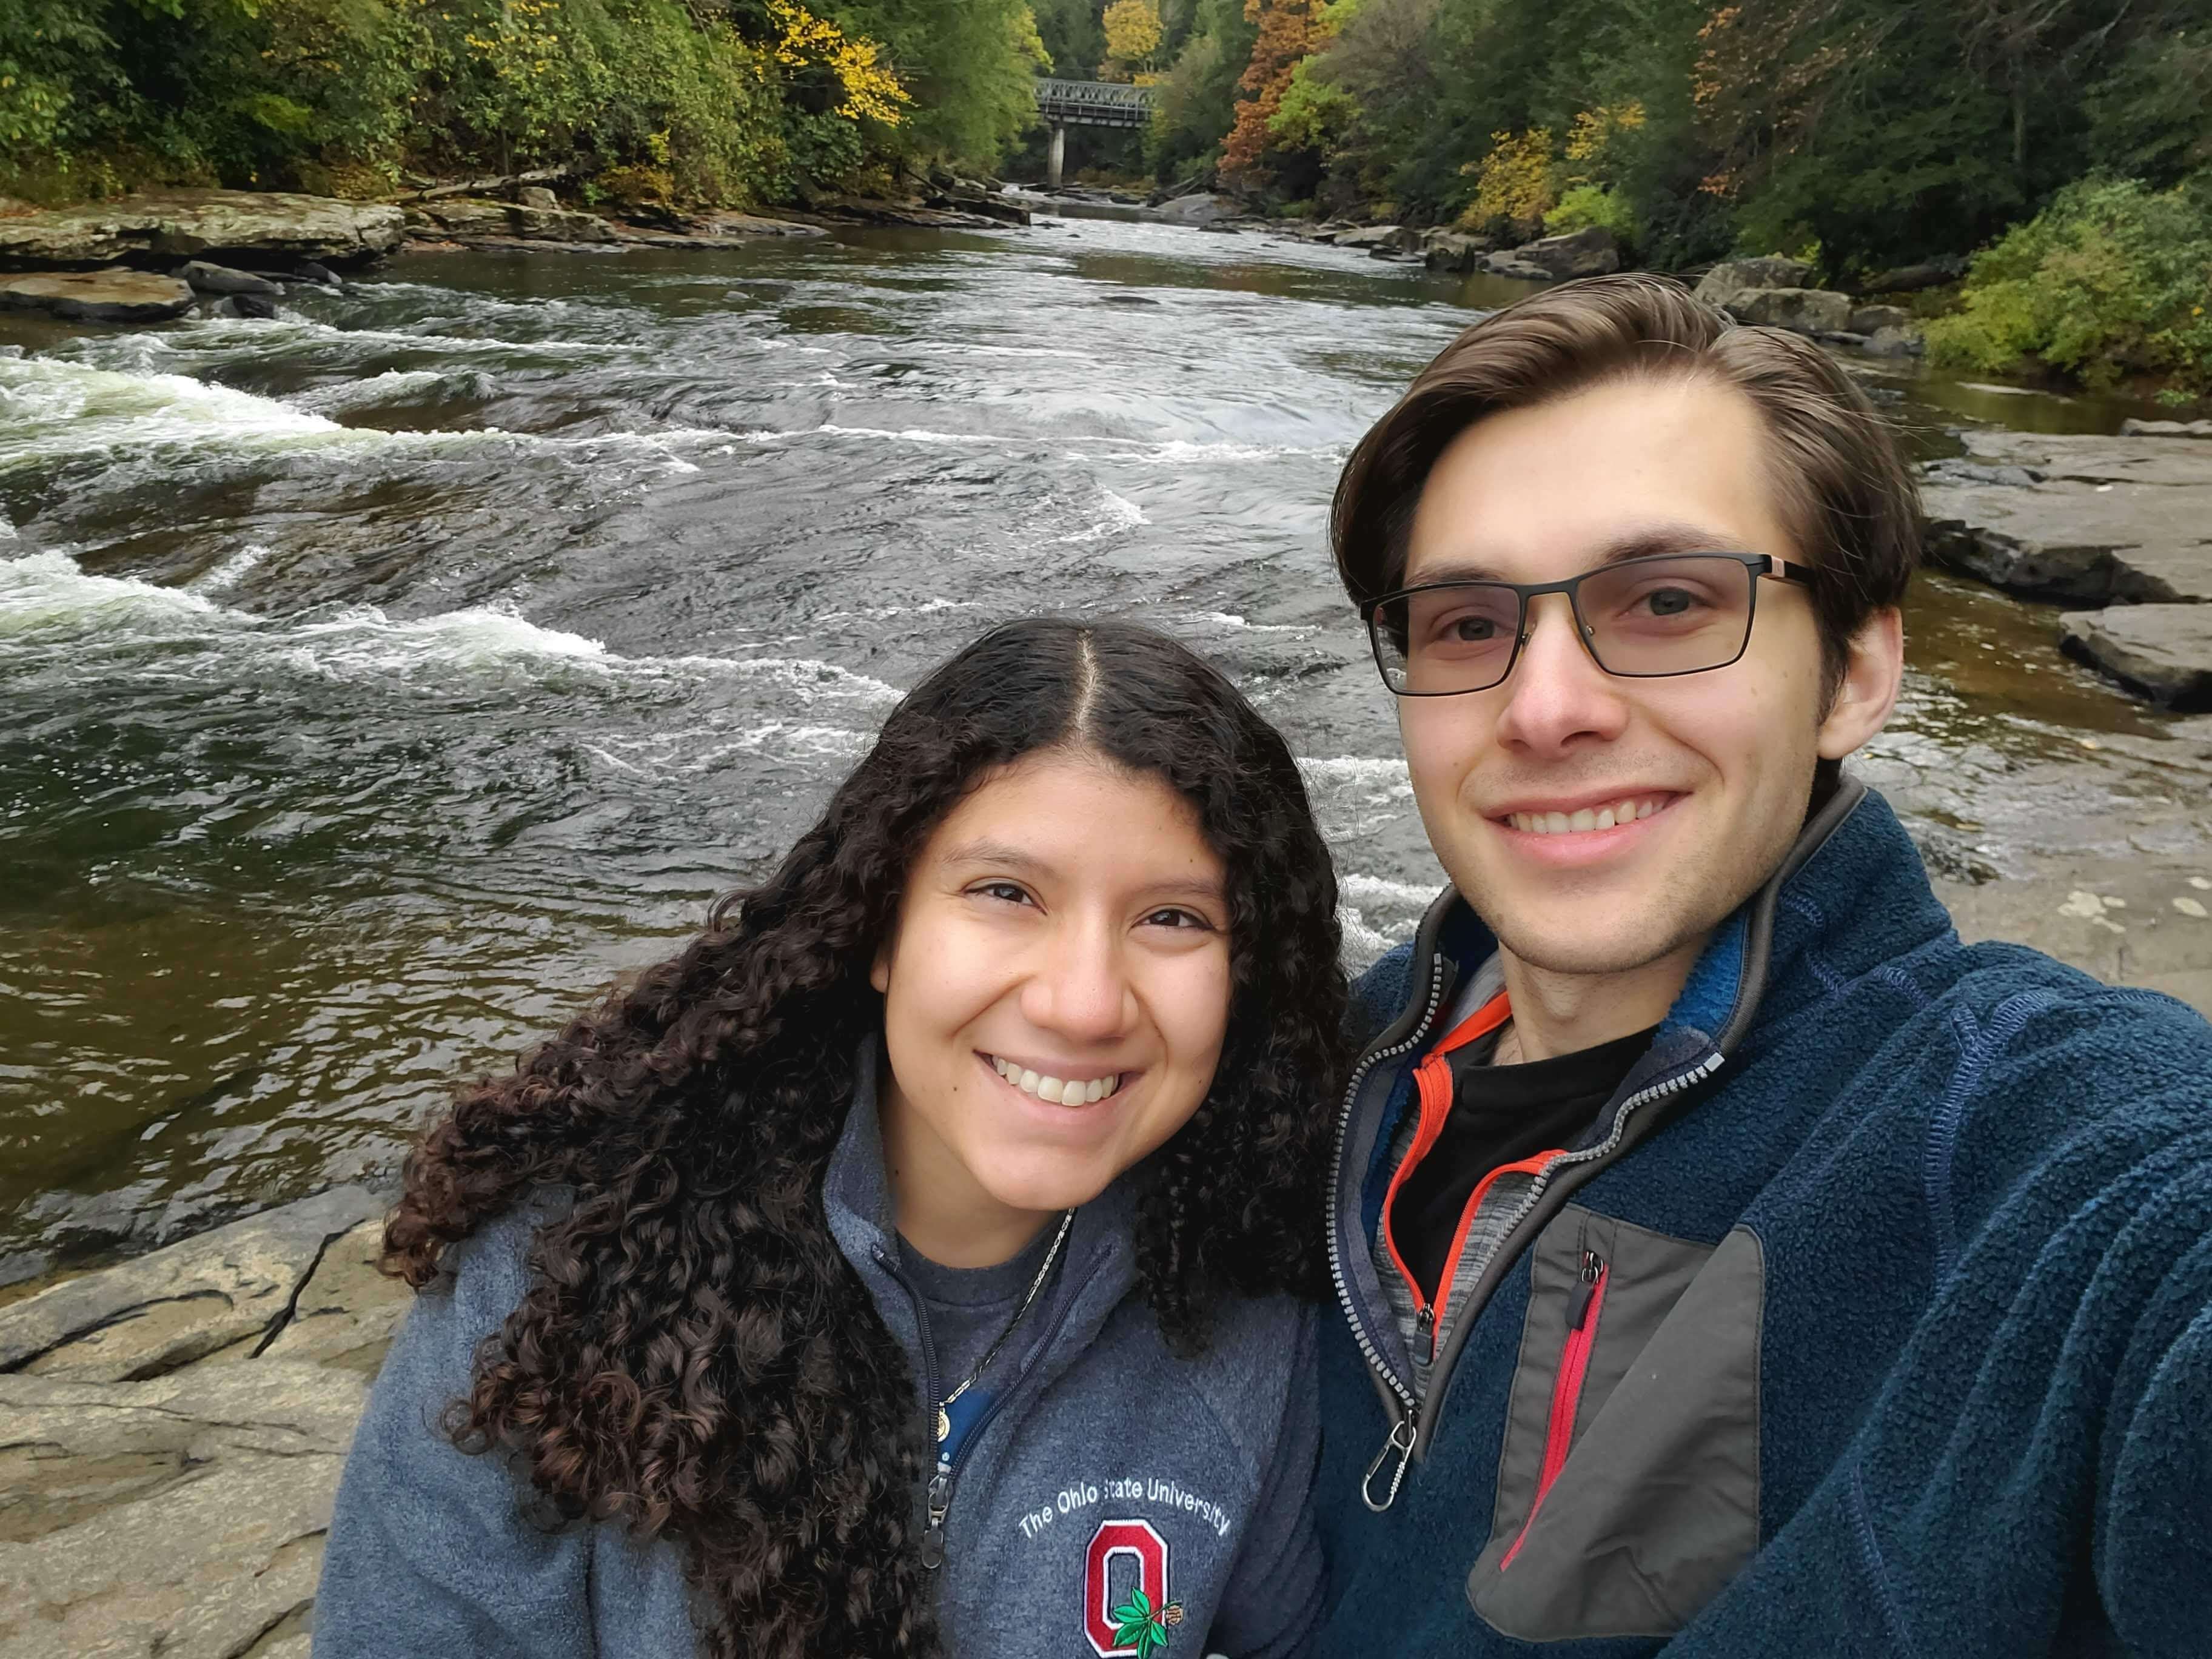 a woman with dark curly hair and a man with short brown hair stand in front of a river smiling